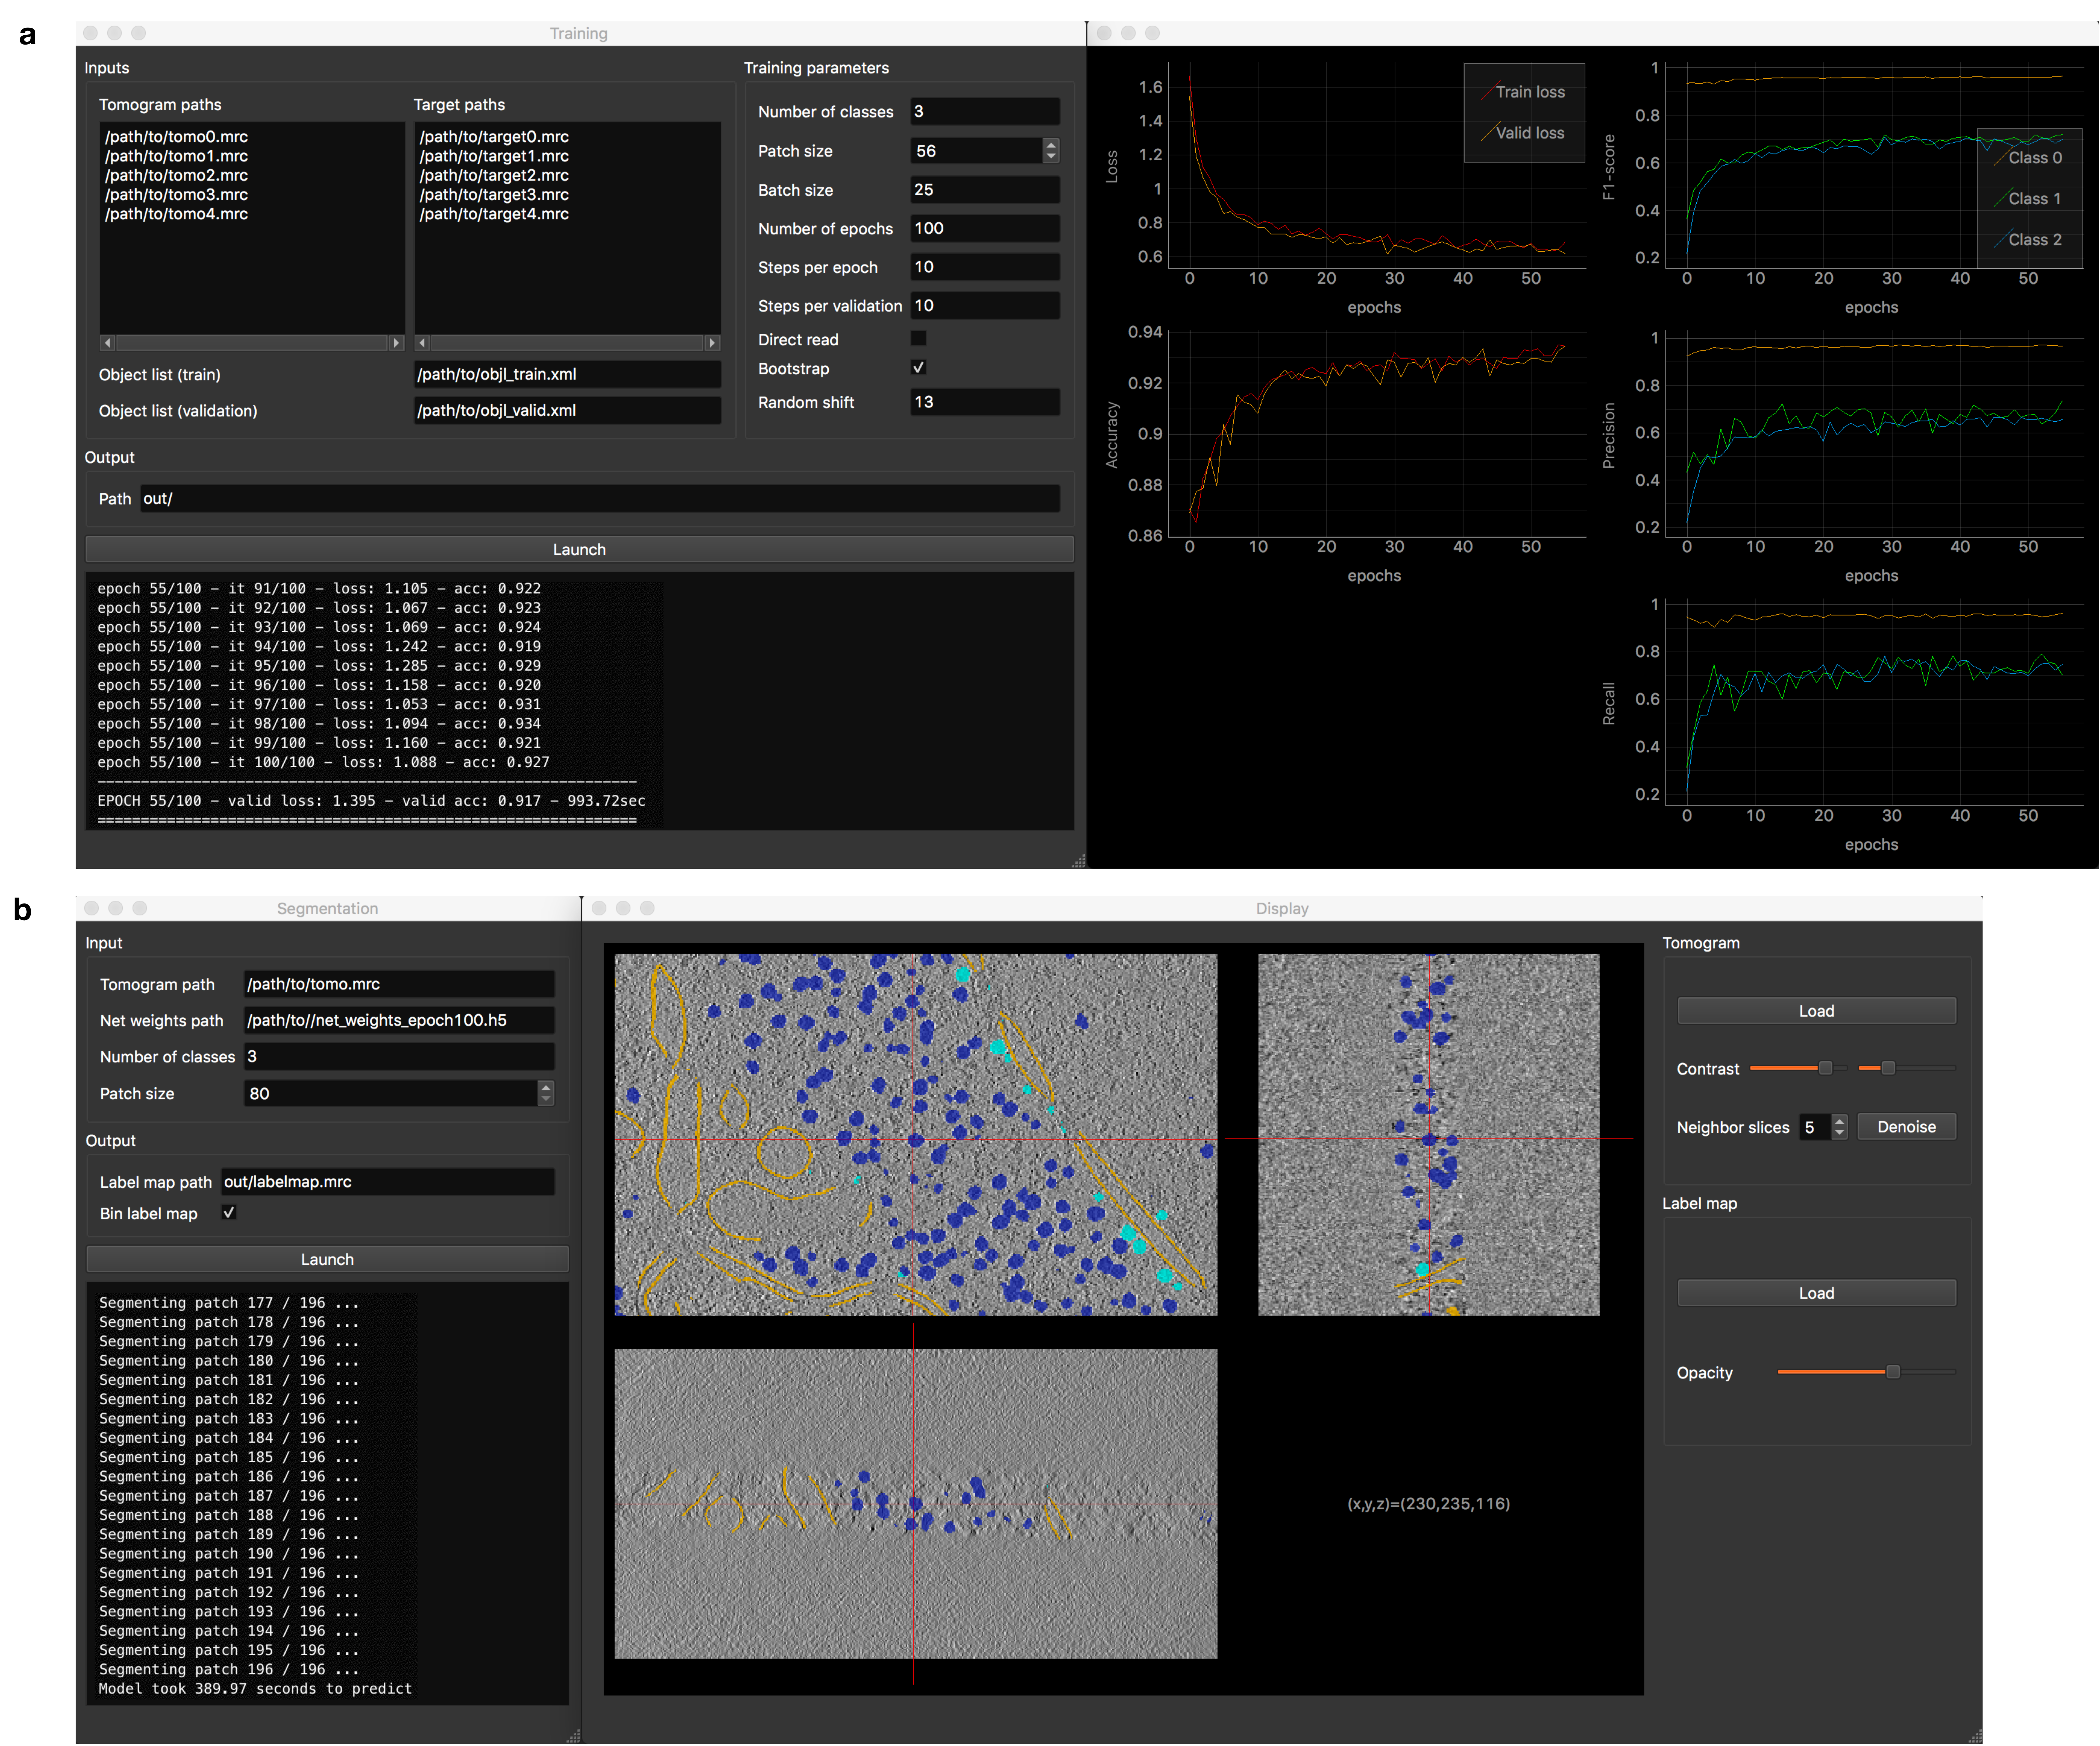 DeepFinder graphical user interface.a, Training interface composed of a first window for parametrizing the procedure and a second window for displaying the training metrics in real-time. b, Segmentation interface which also opens a data visualization tool. This tool allows the user to explore the tomogram with superimposed segmentations. In addition, DeepFinder also incorporates interfaces for tomogram annotation, target generation and clustering (see the documentation (GitLab) of DeepFinder for more information).